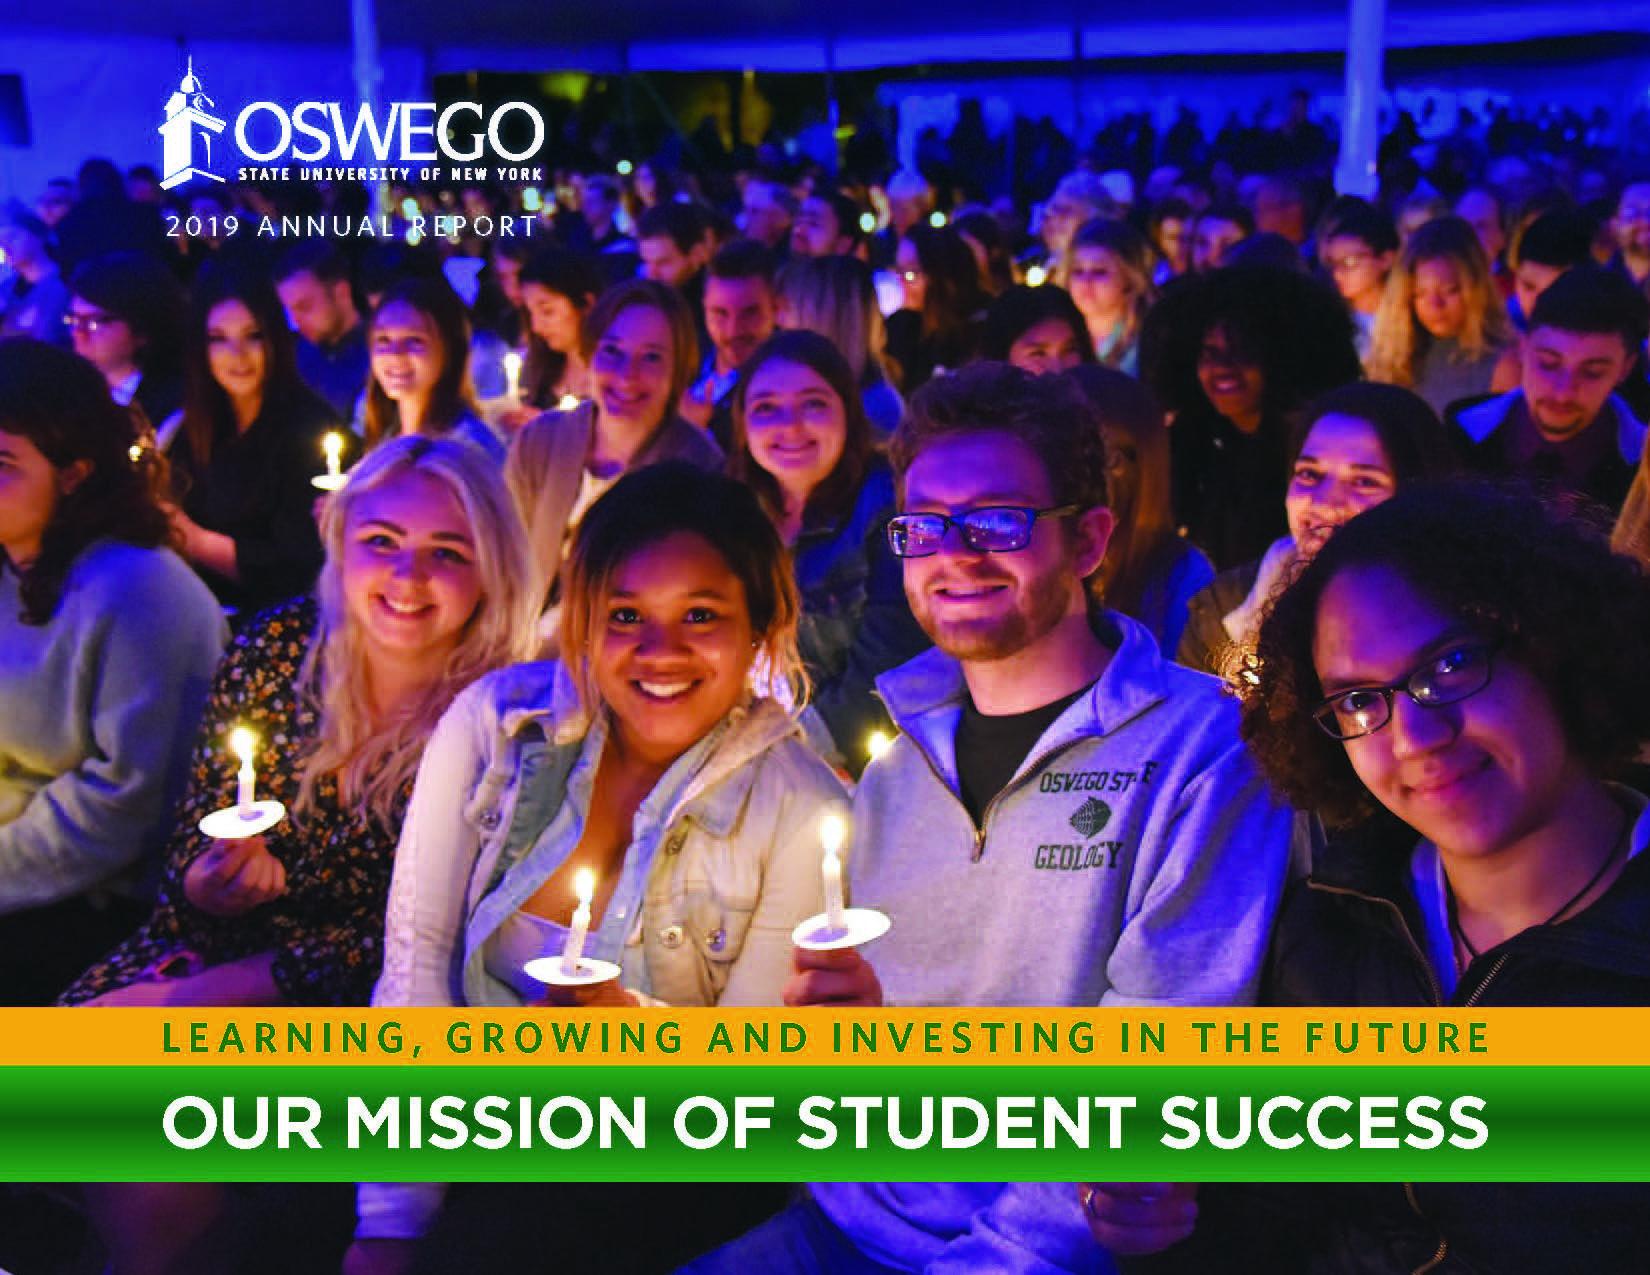 Annual Report highlights mission of student success SUNY Oswego news